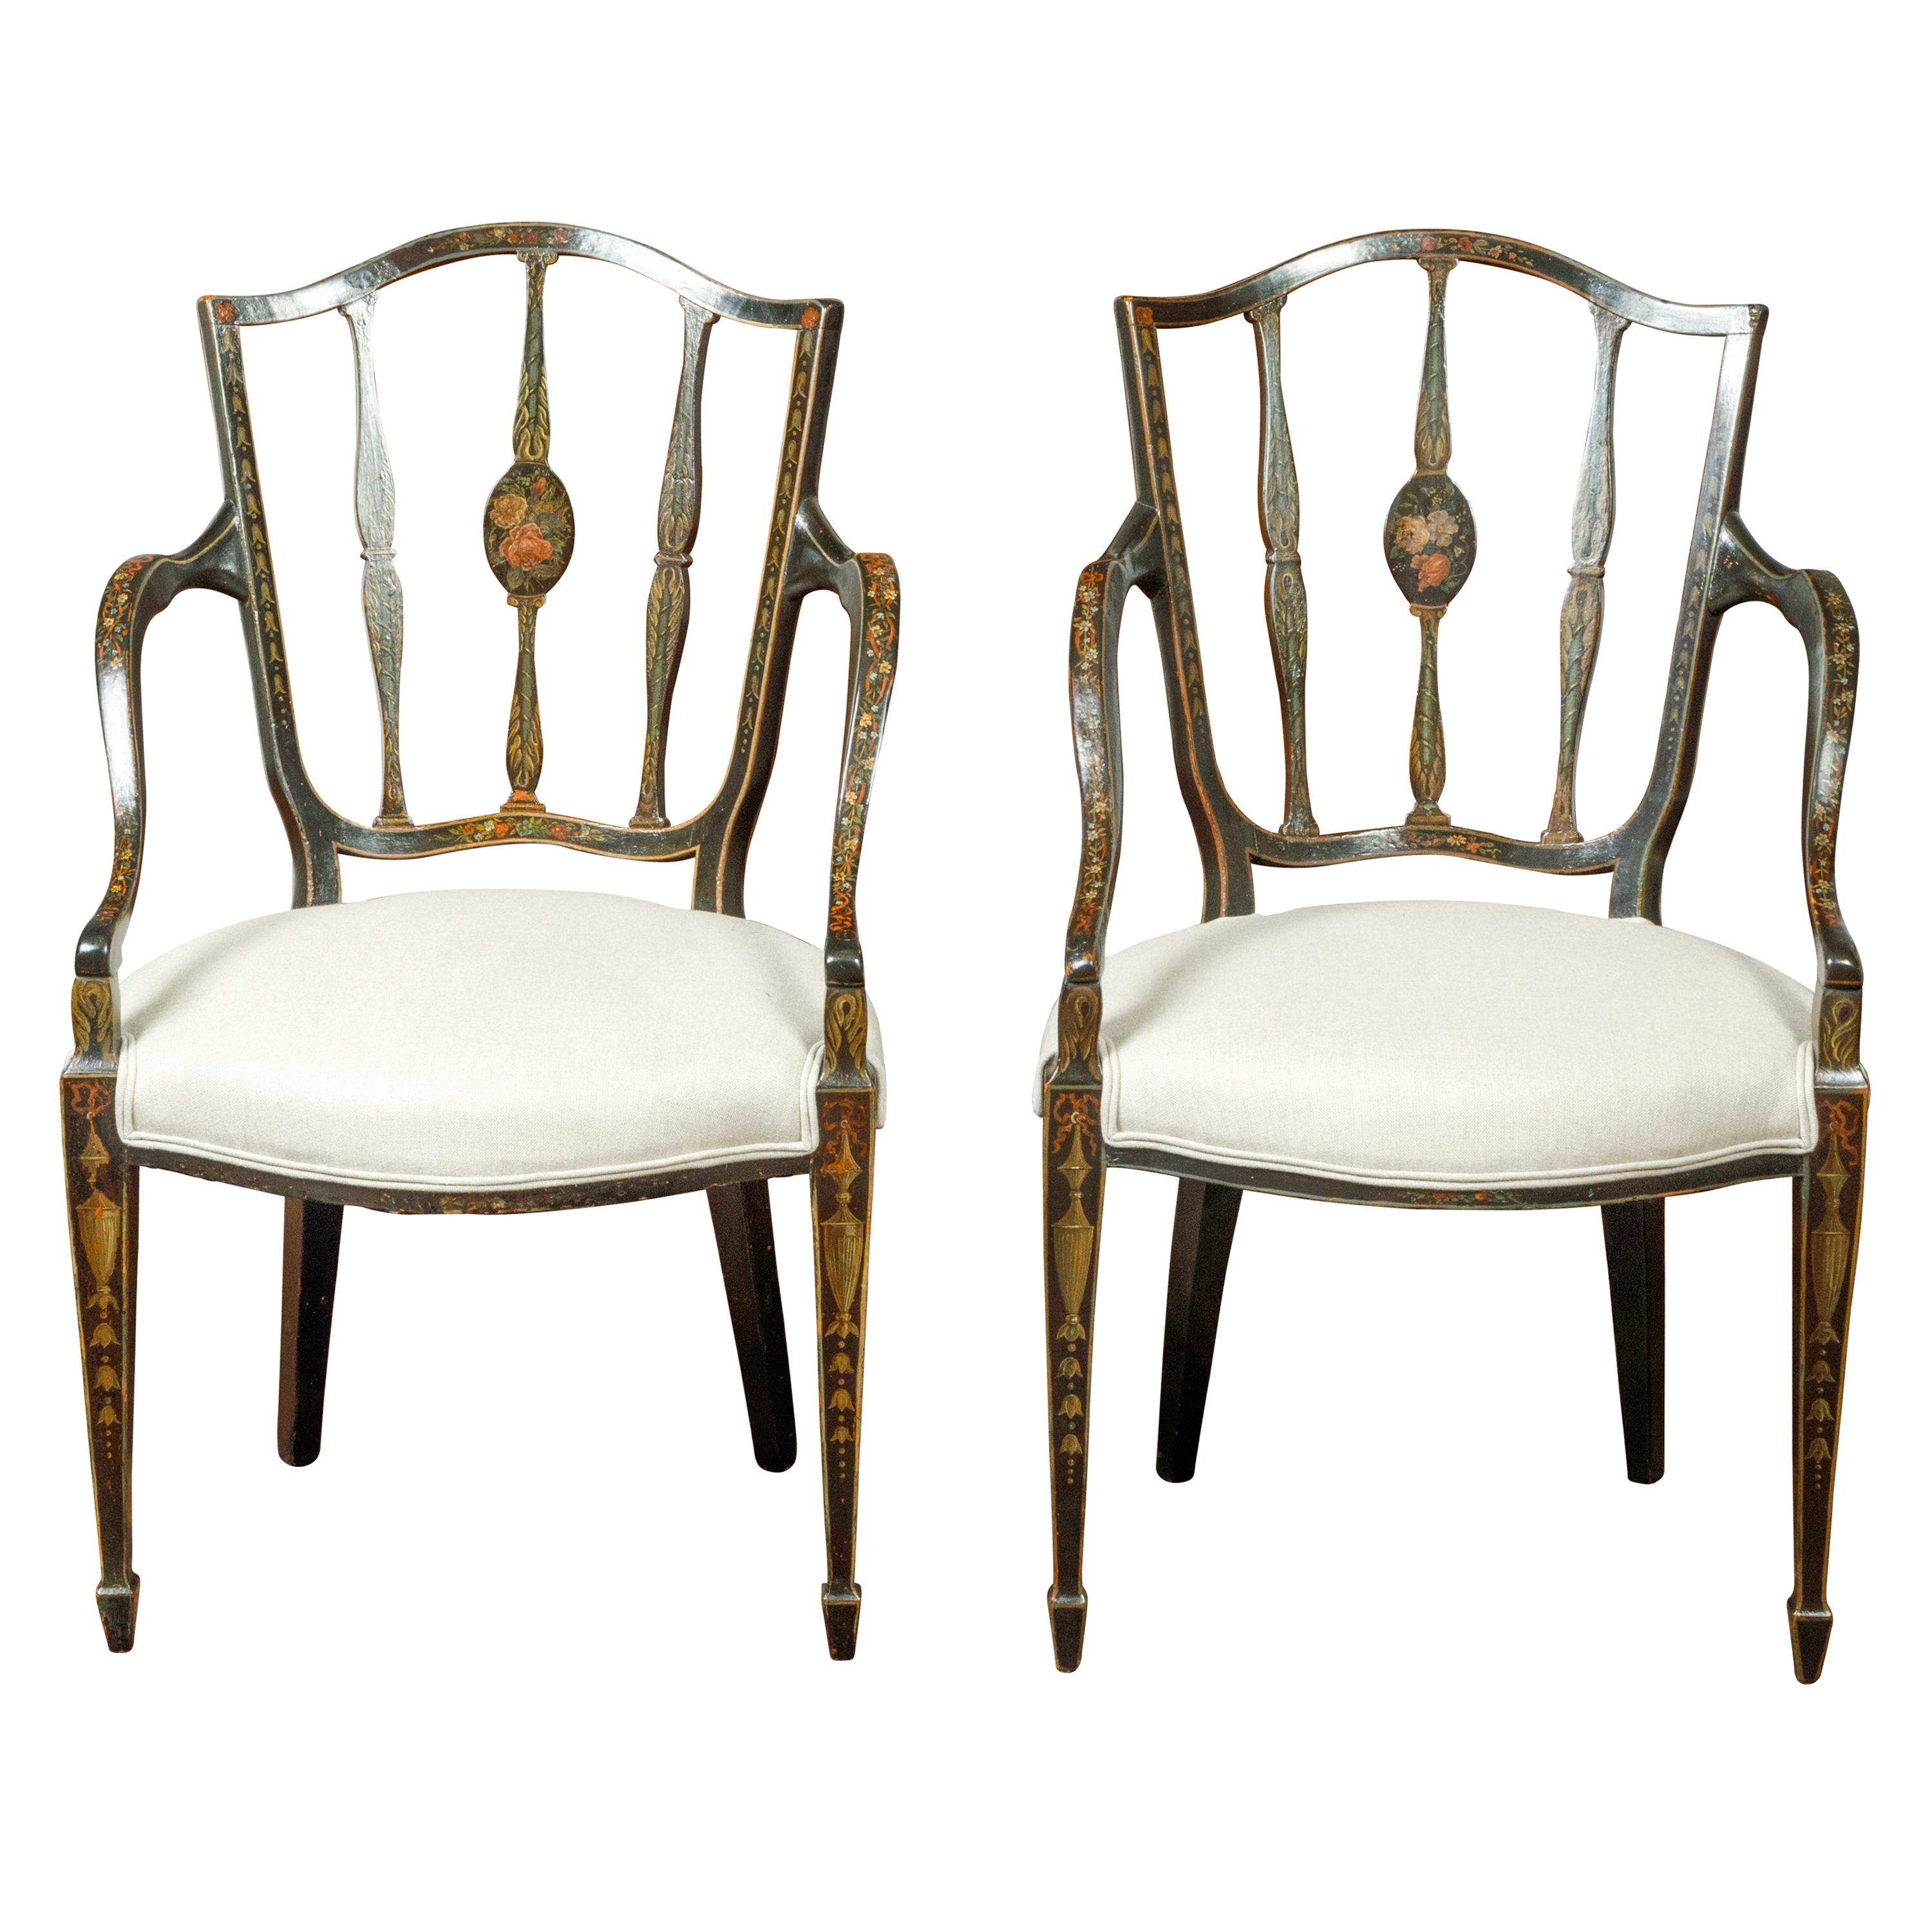 Pair of English Upholstered Armchairs with Hand-Painted Foliage and Floral Décor